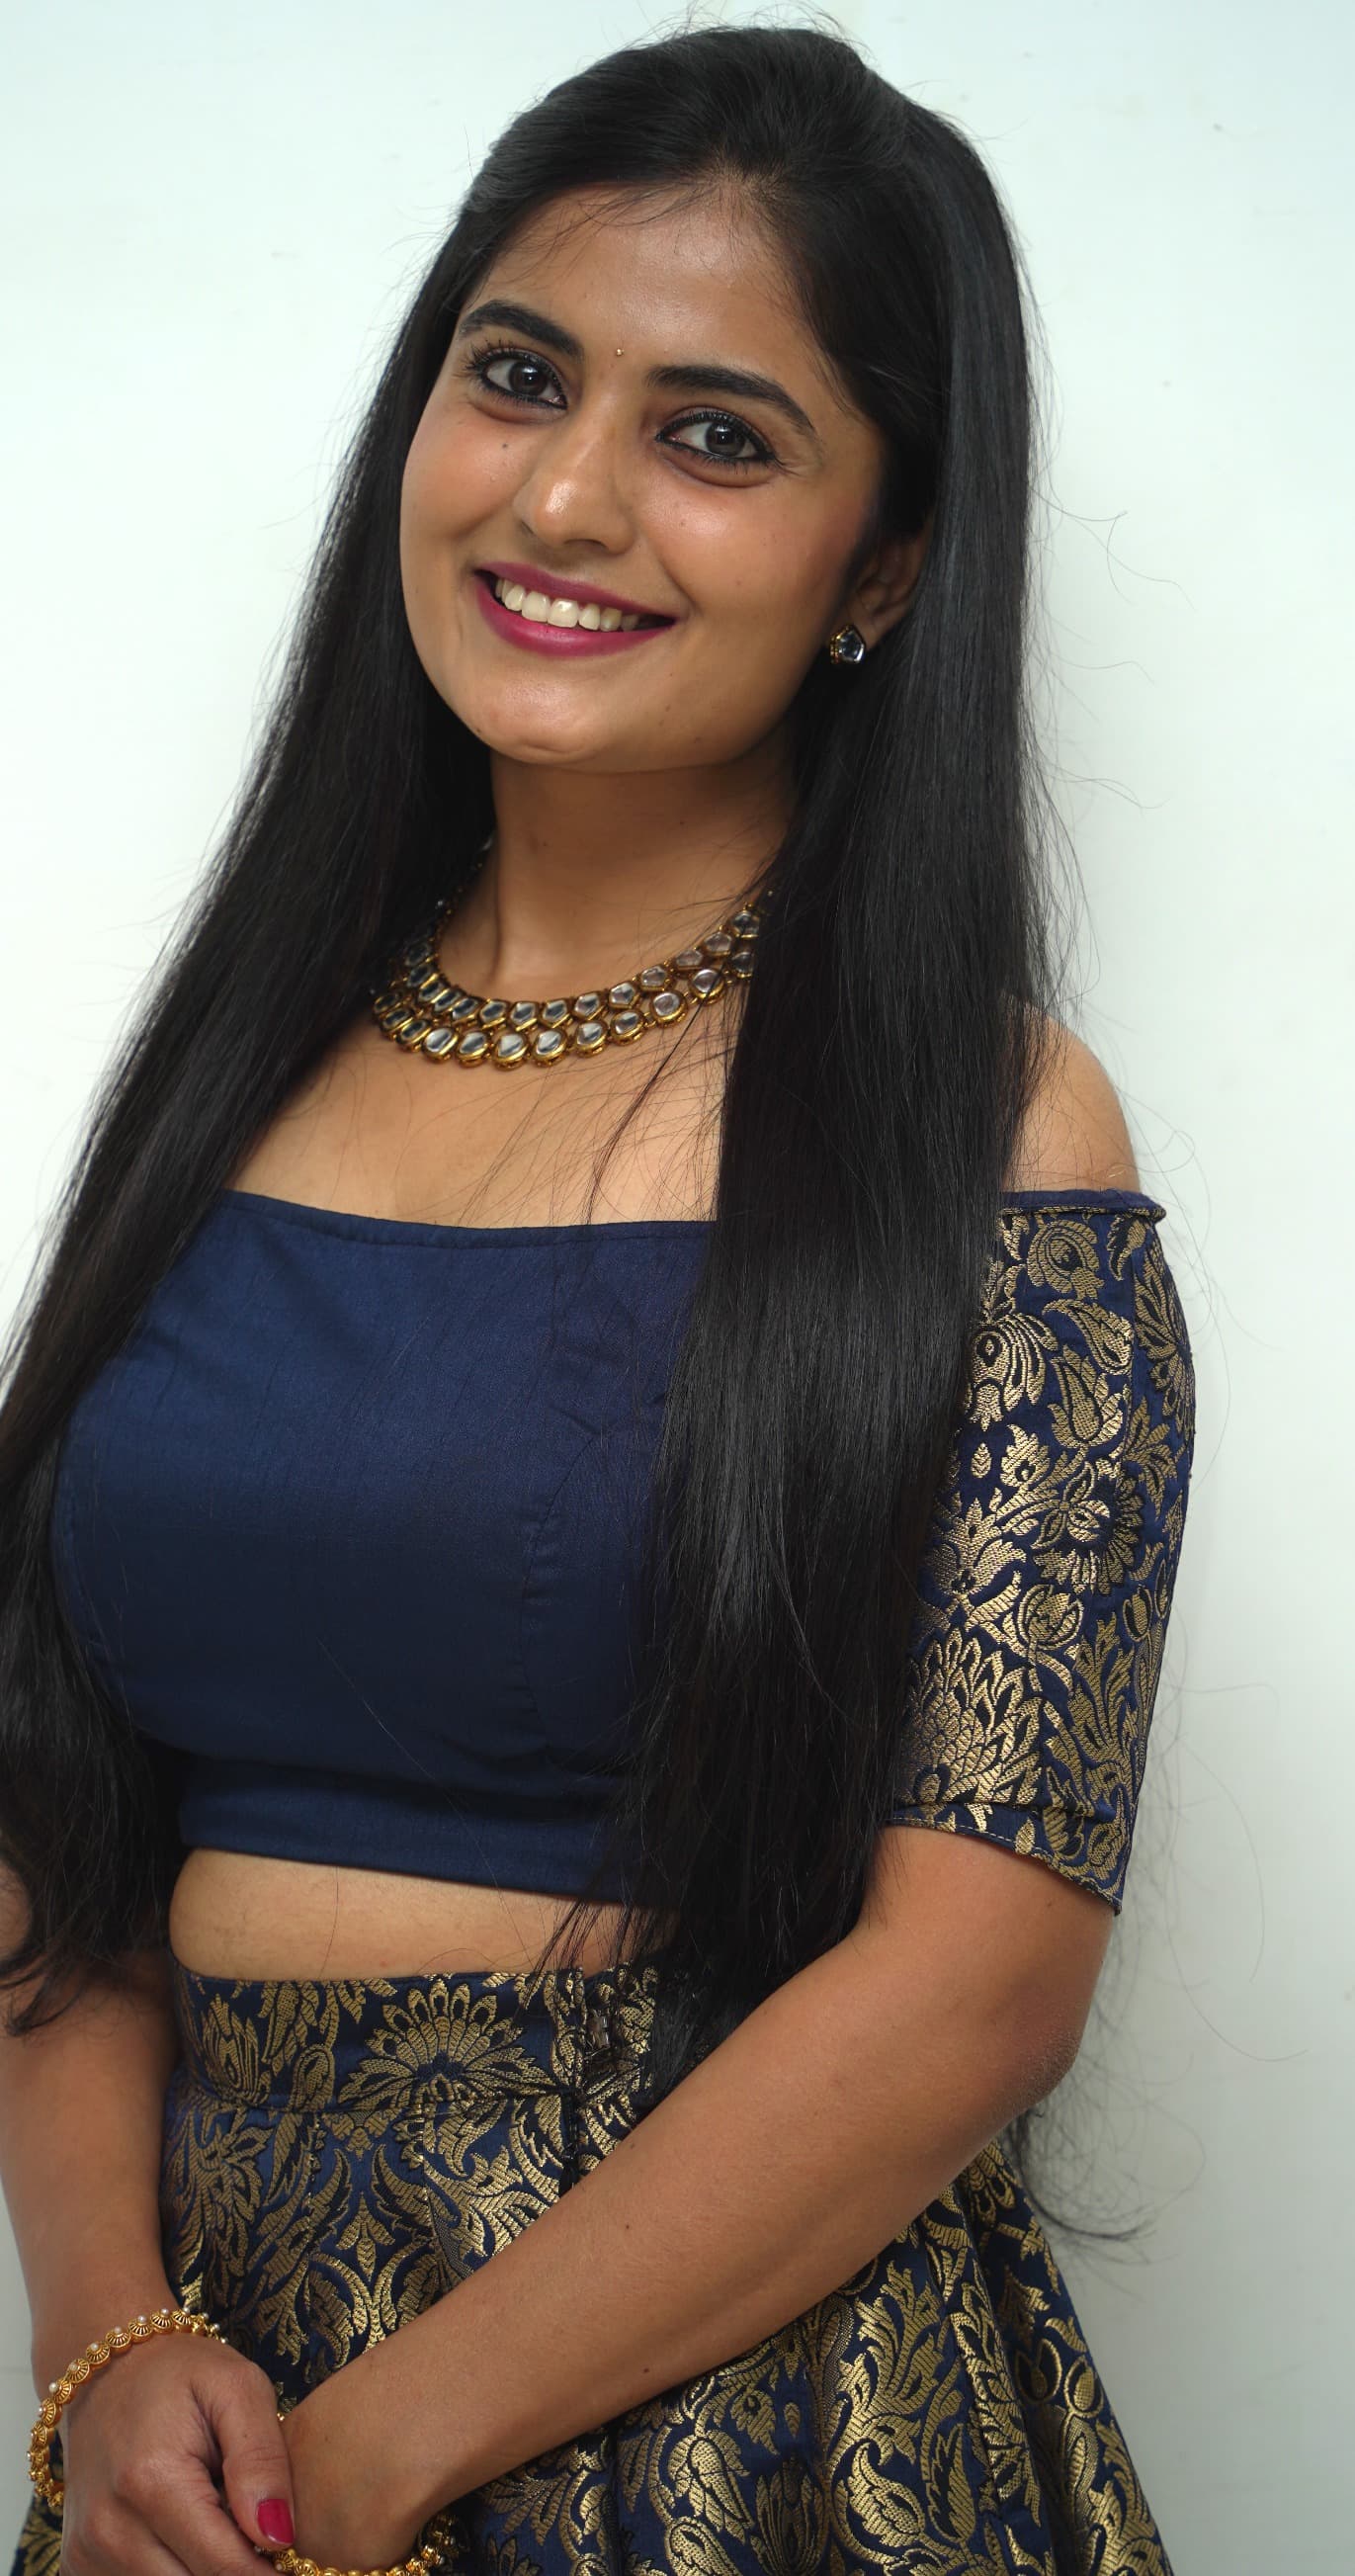 Panchami Rao makes her debut as leading lady